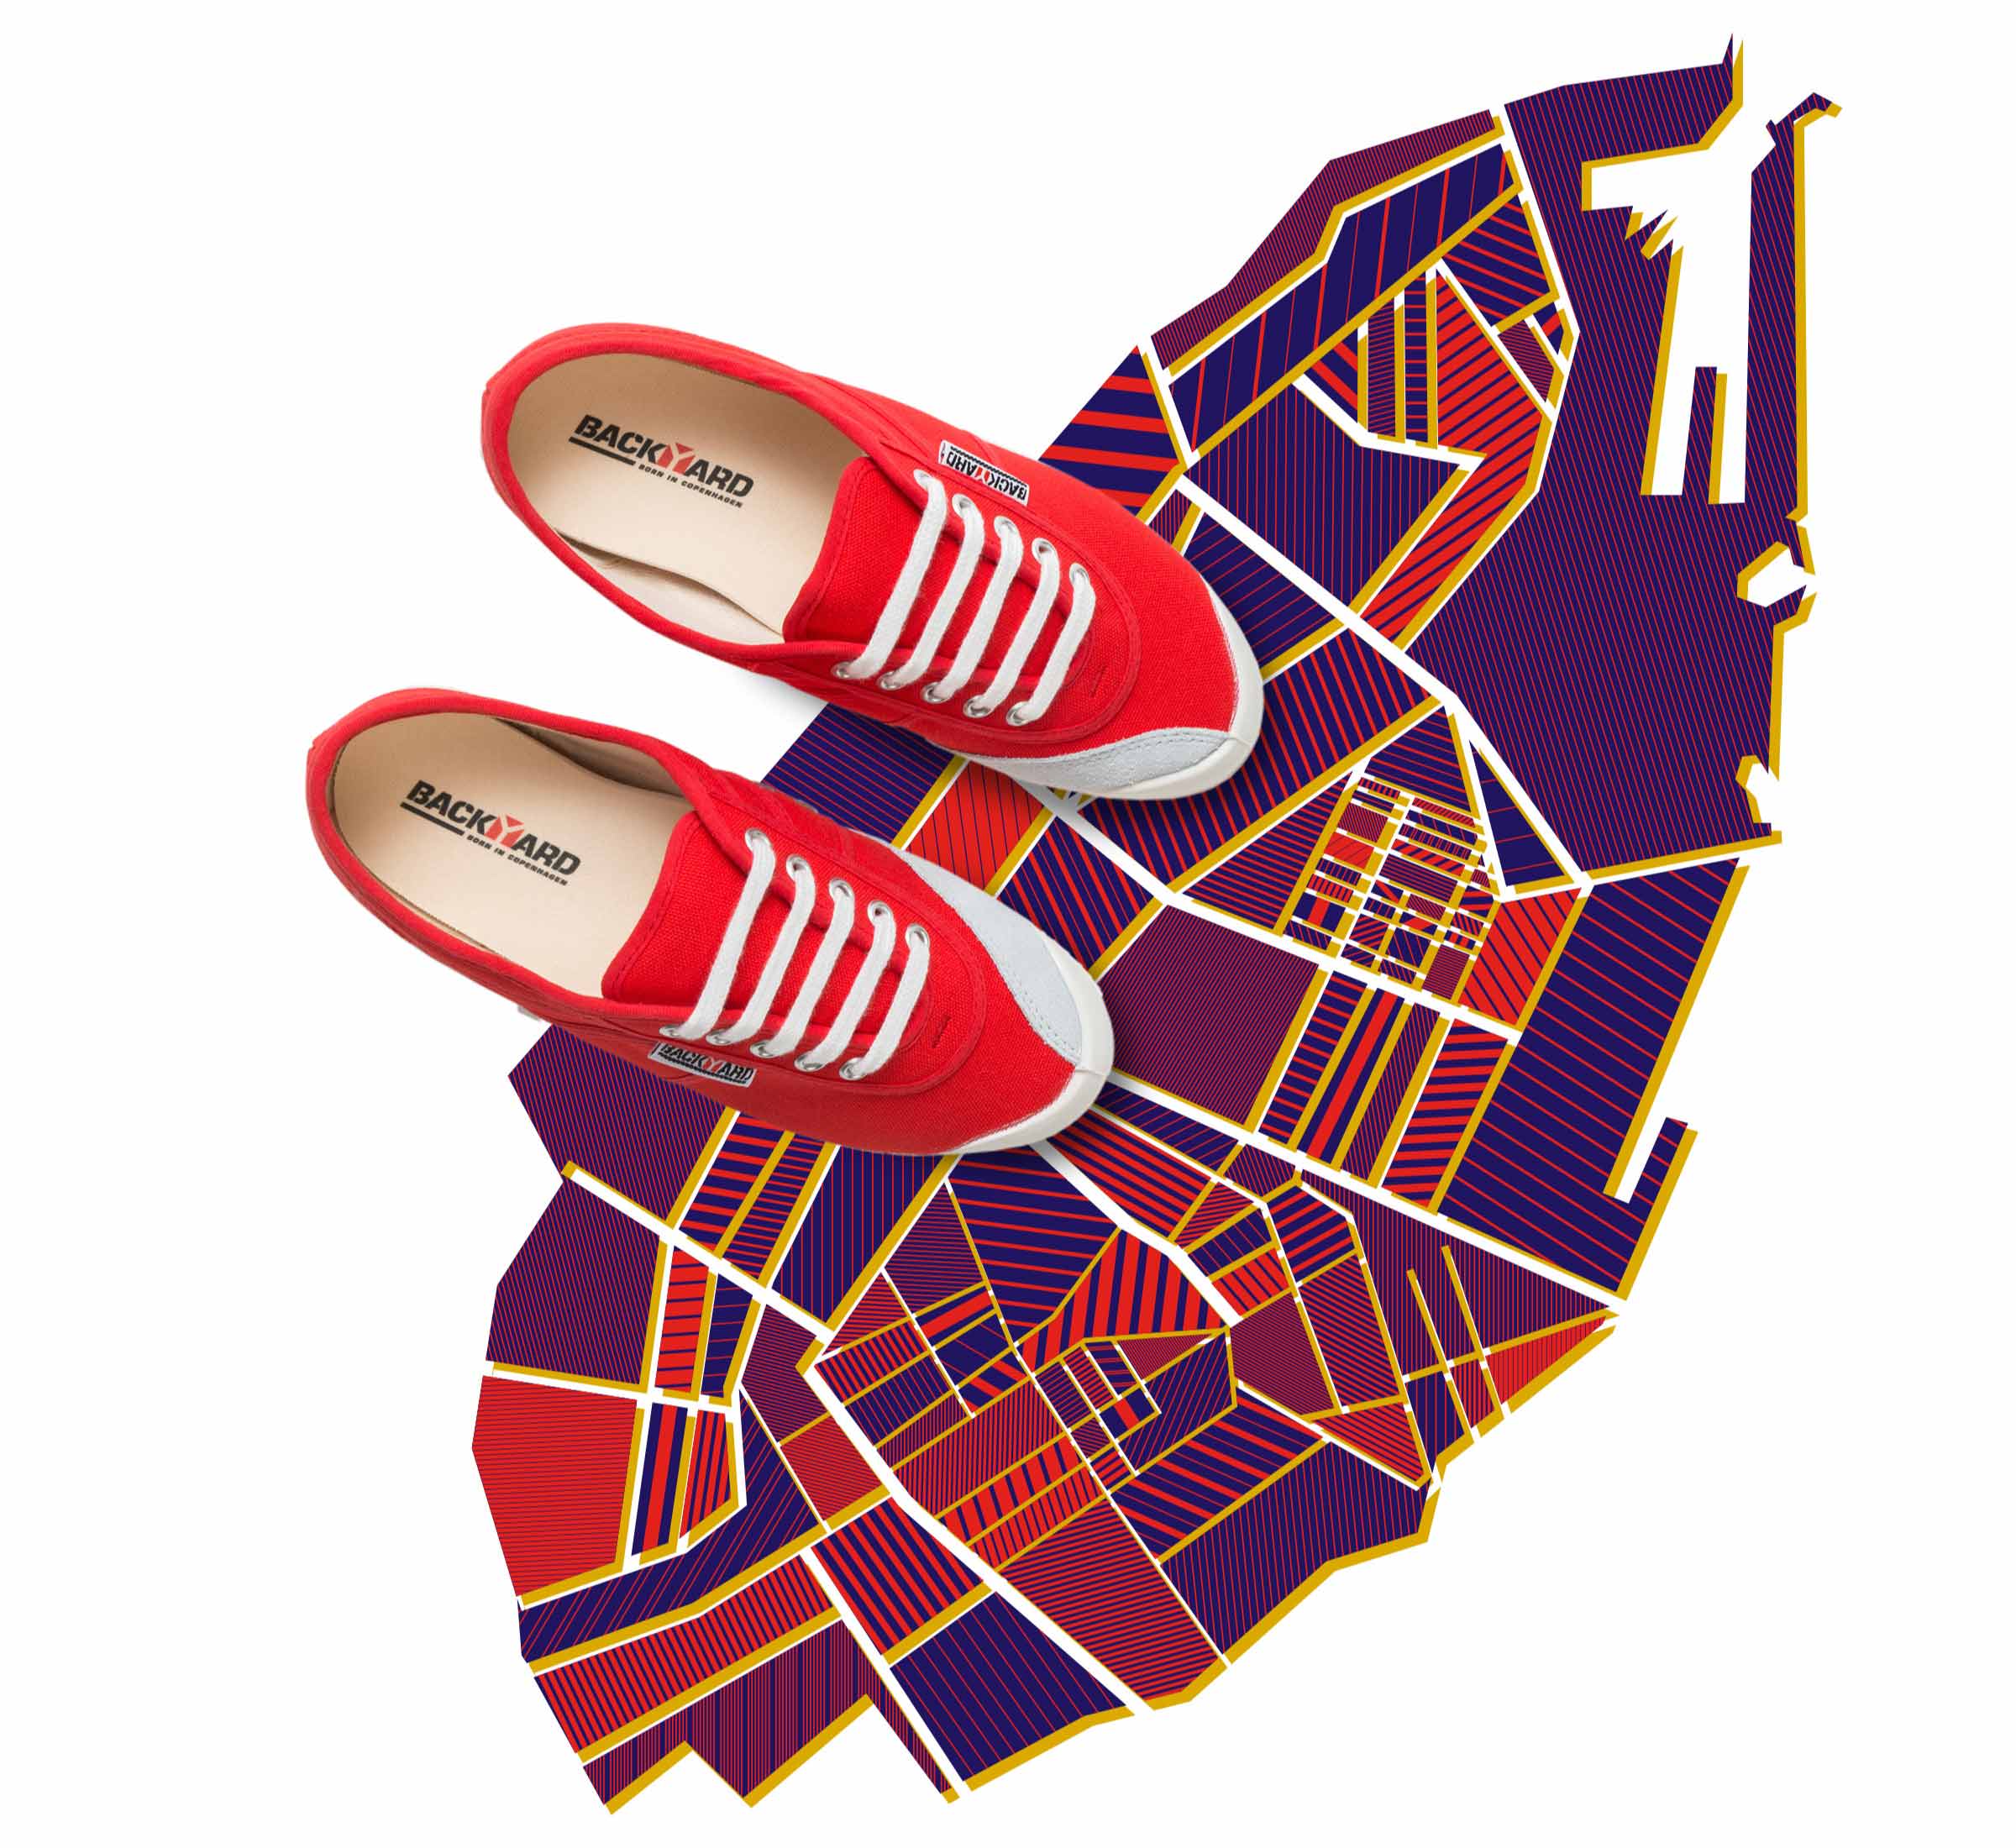 Shoes and Map Illustration